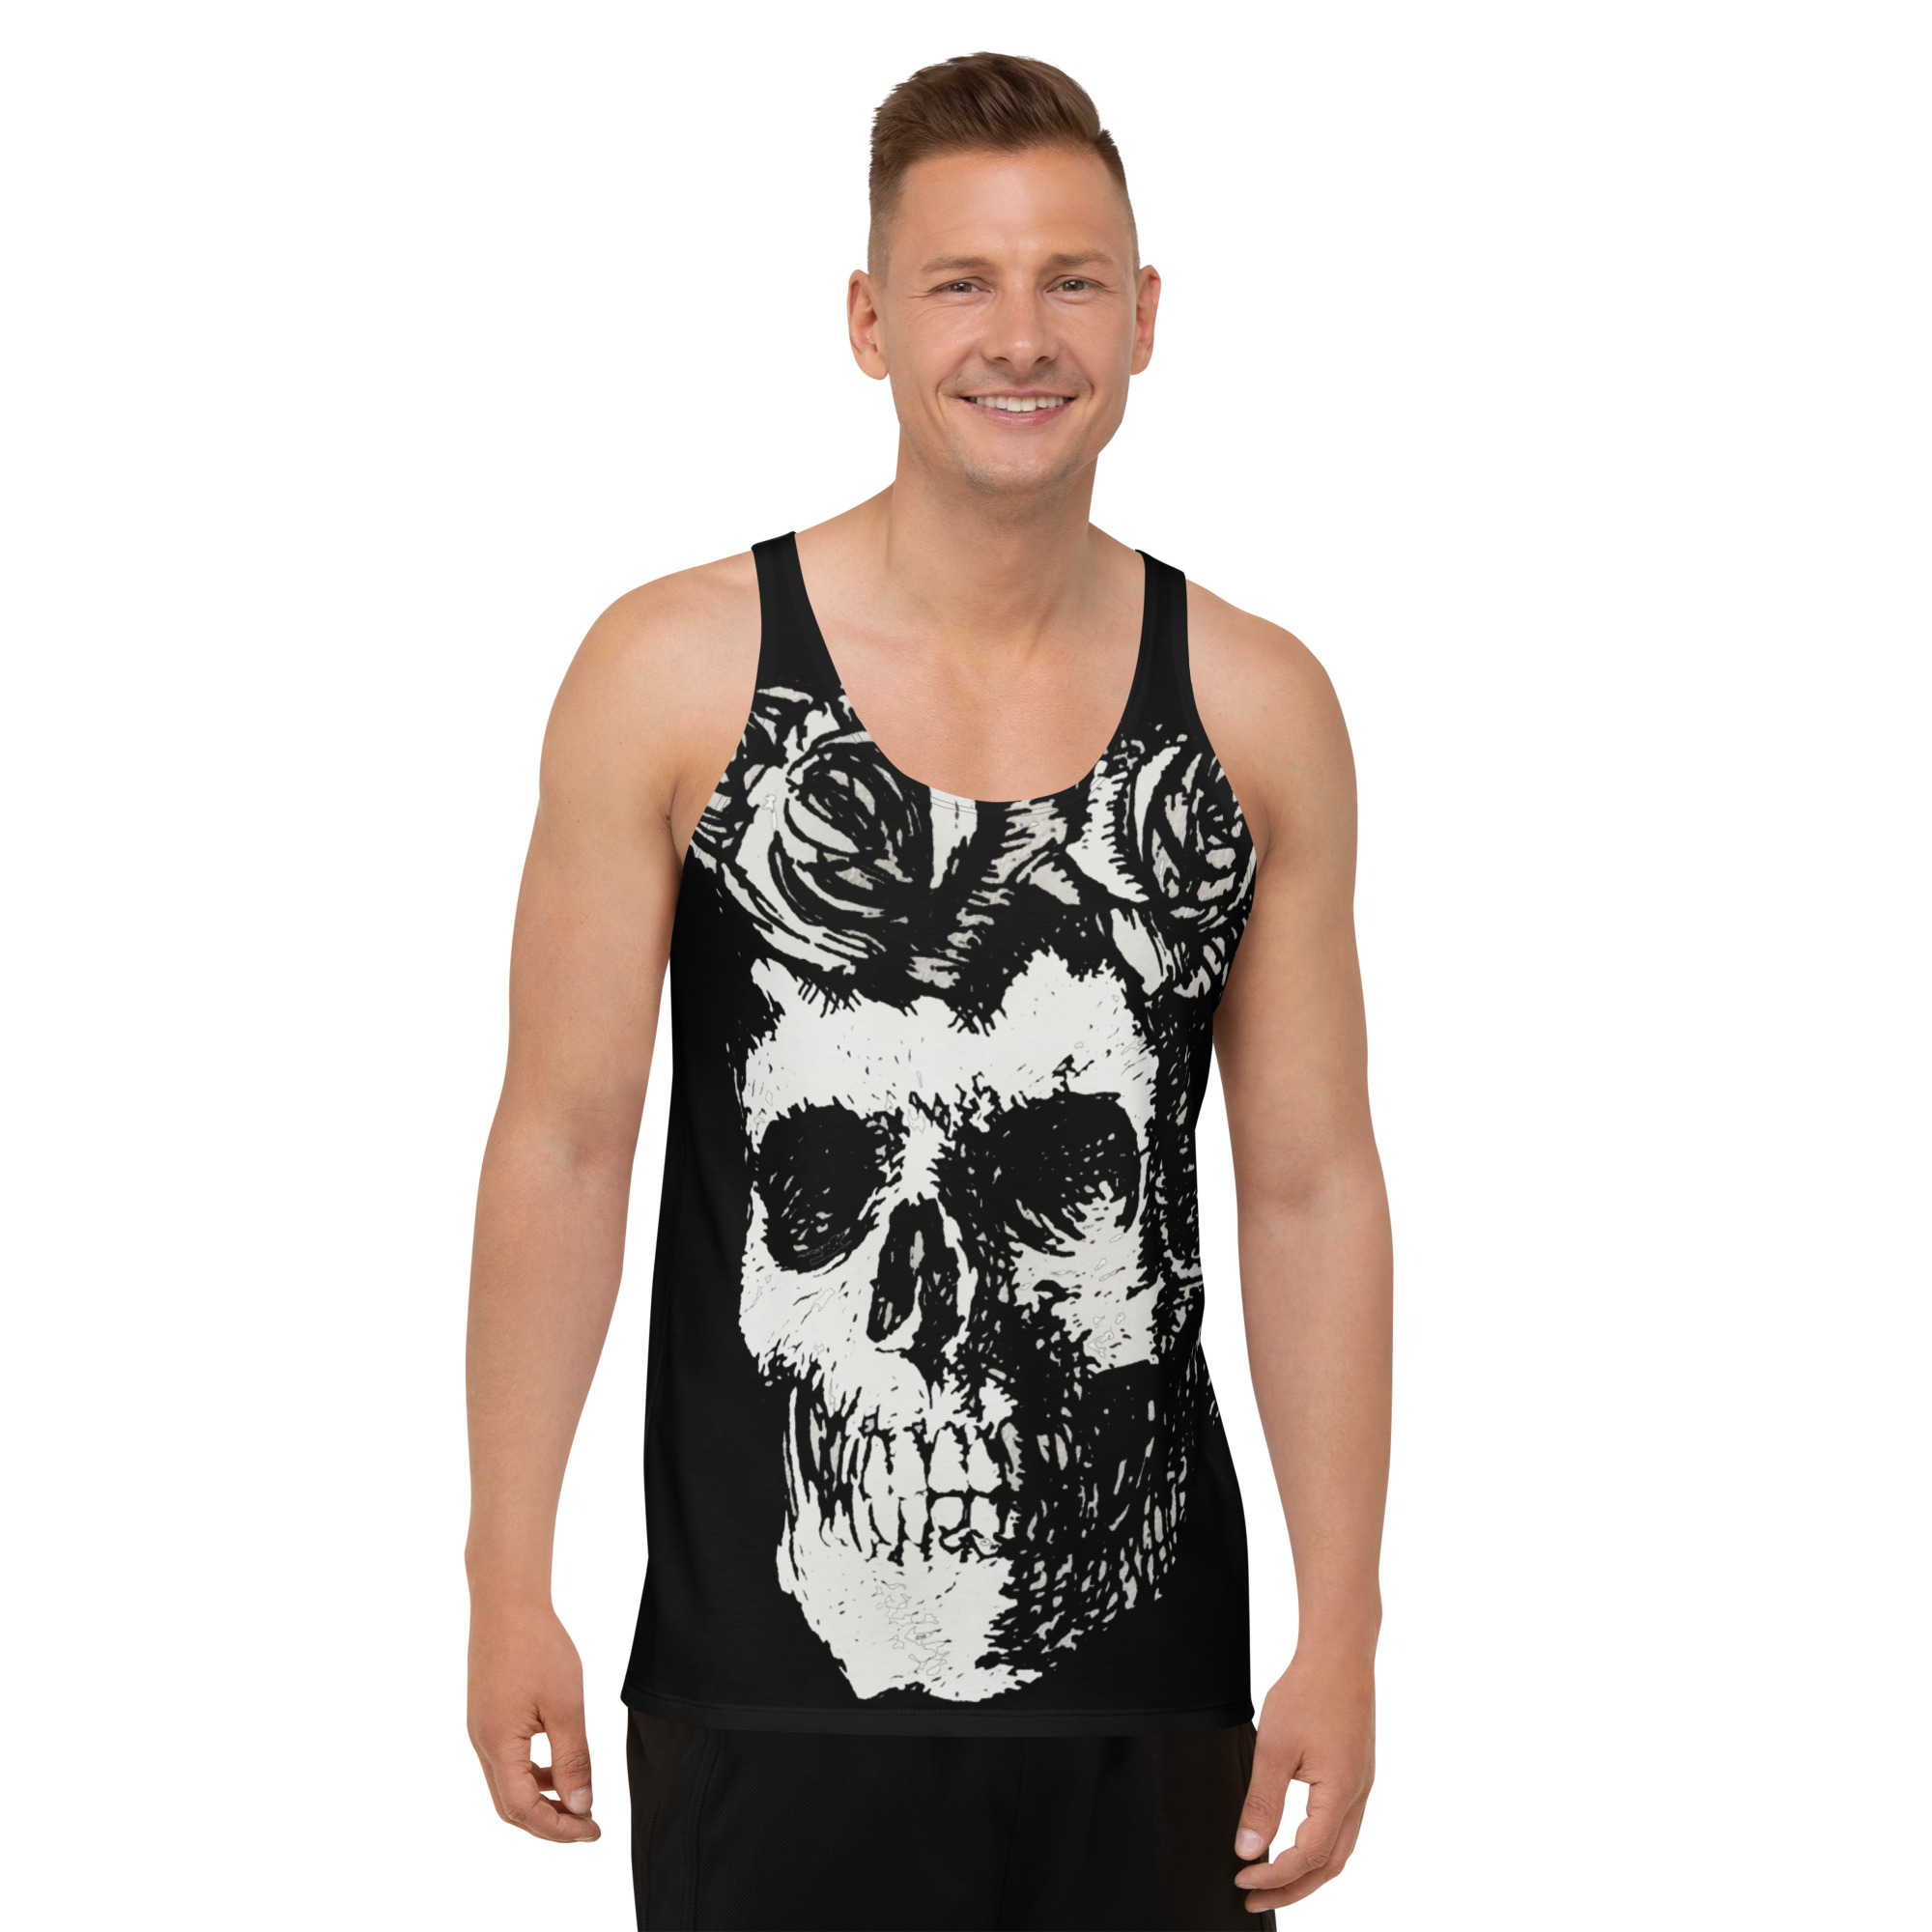 all-over-print-mens-tank-top-white-front-6357042499554.jpg